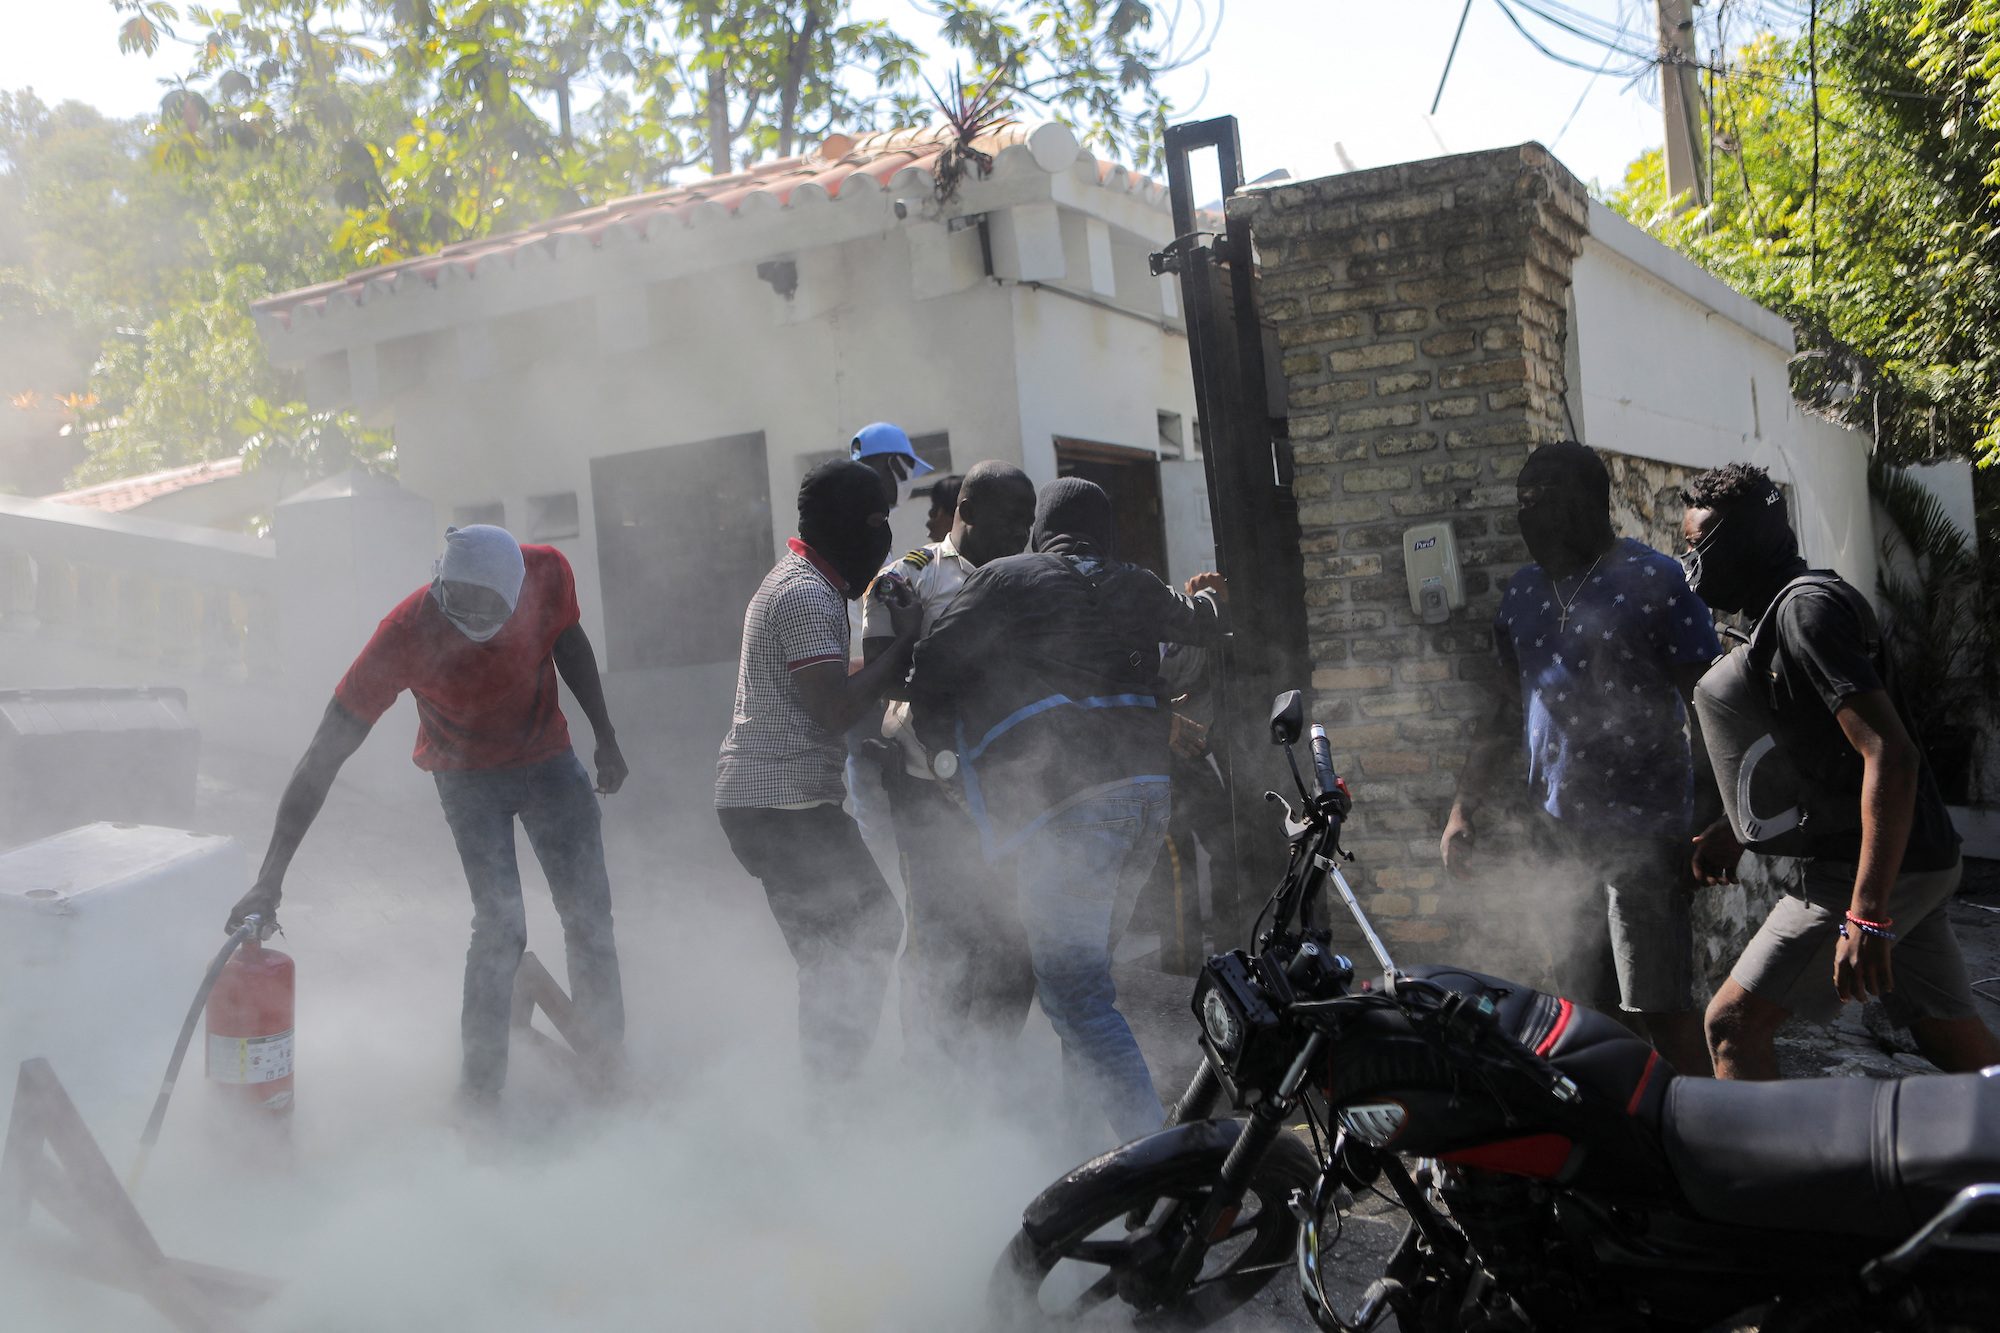 Haiti police block streets, break into airport to protest officer killings